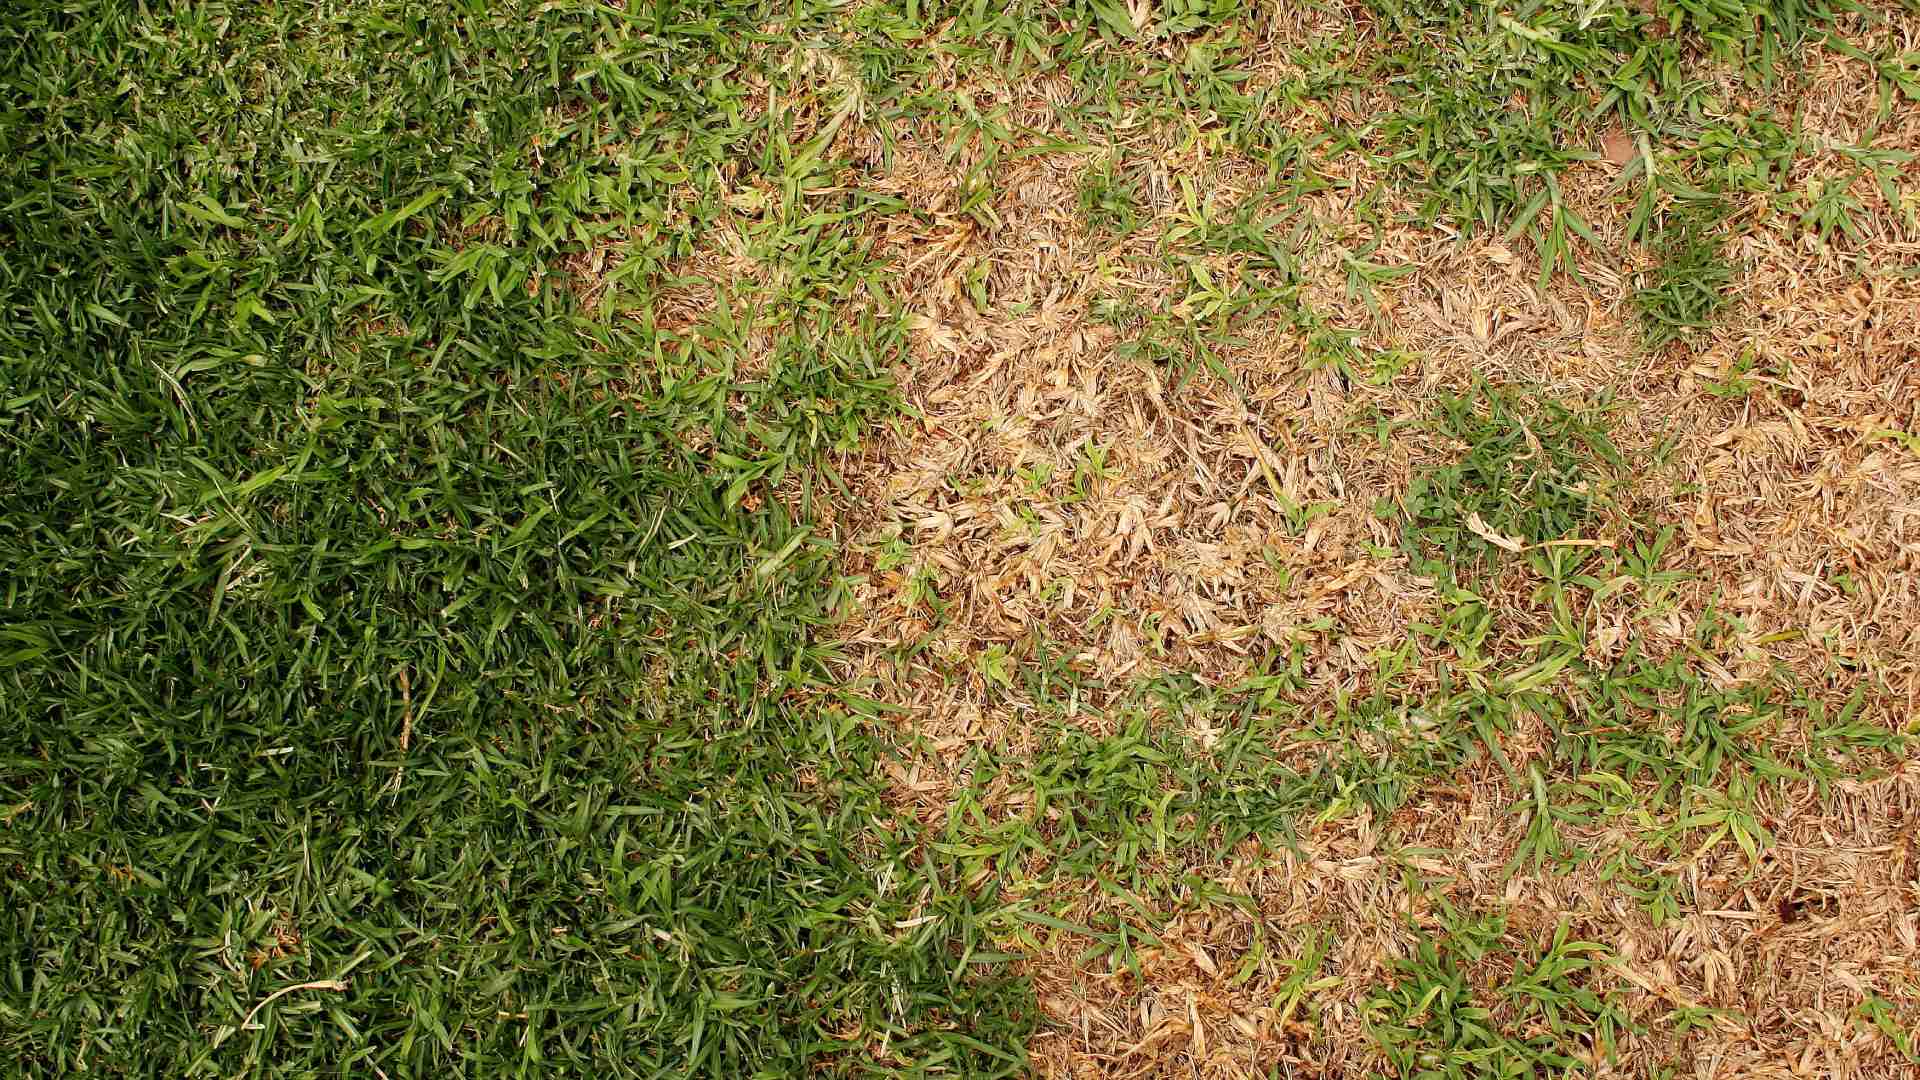 Drying lawn from lawn disease in Blue Springs, MO.